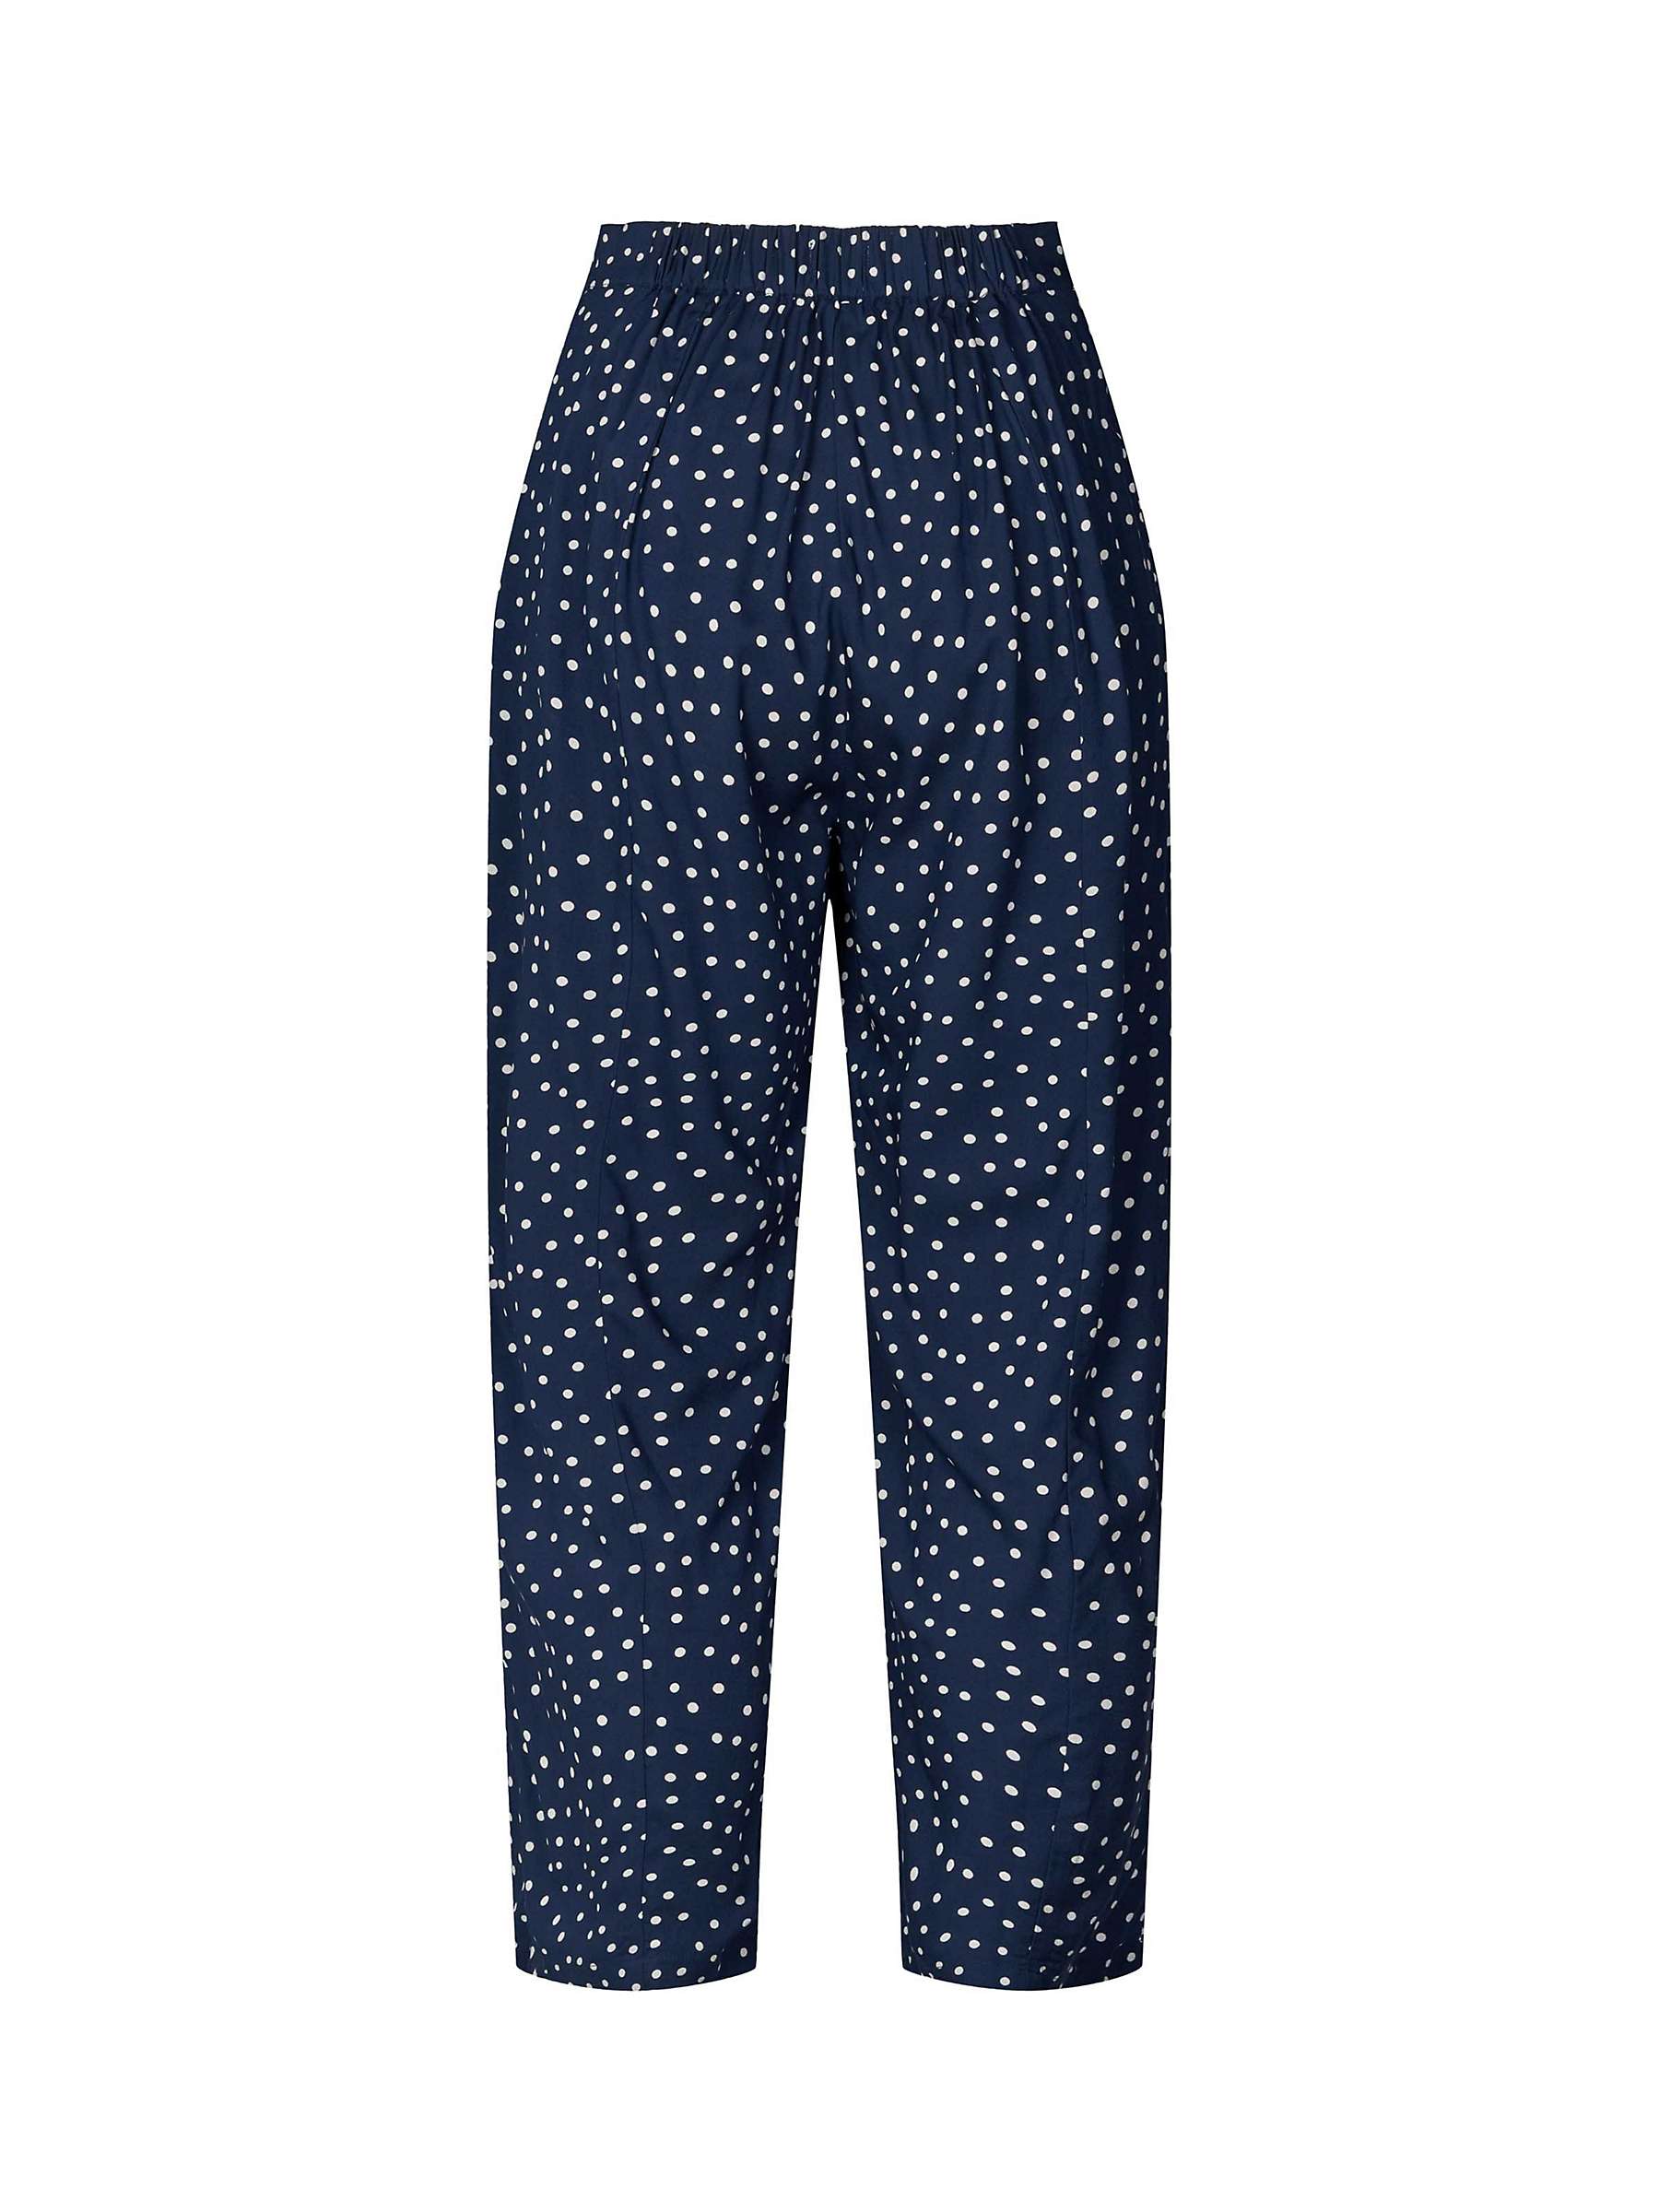 Buy Lollys Laundry Maisie Dot Print Cropped Pleat Trousers, Navy/White Online at johnlewis.com